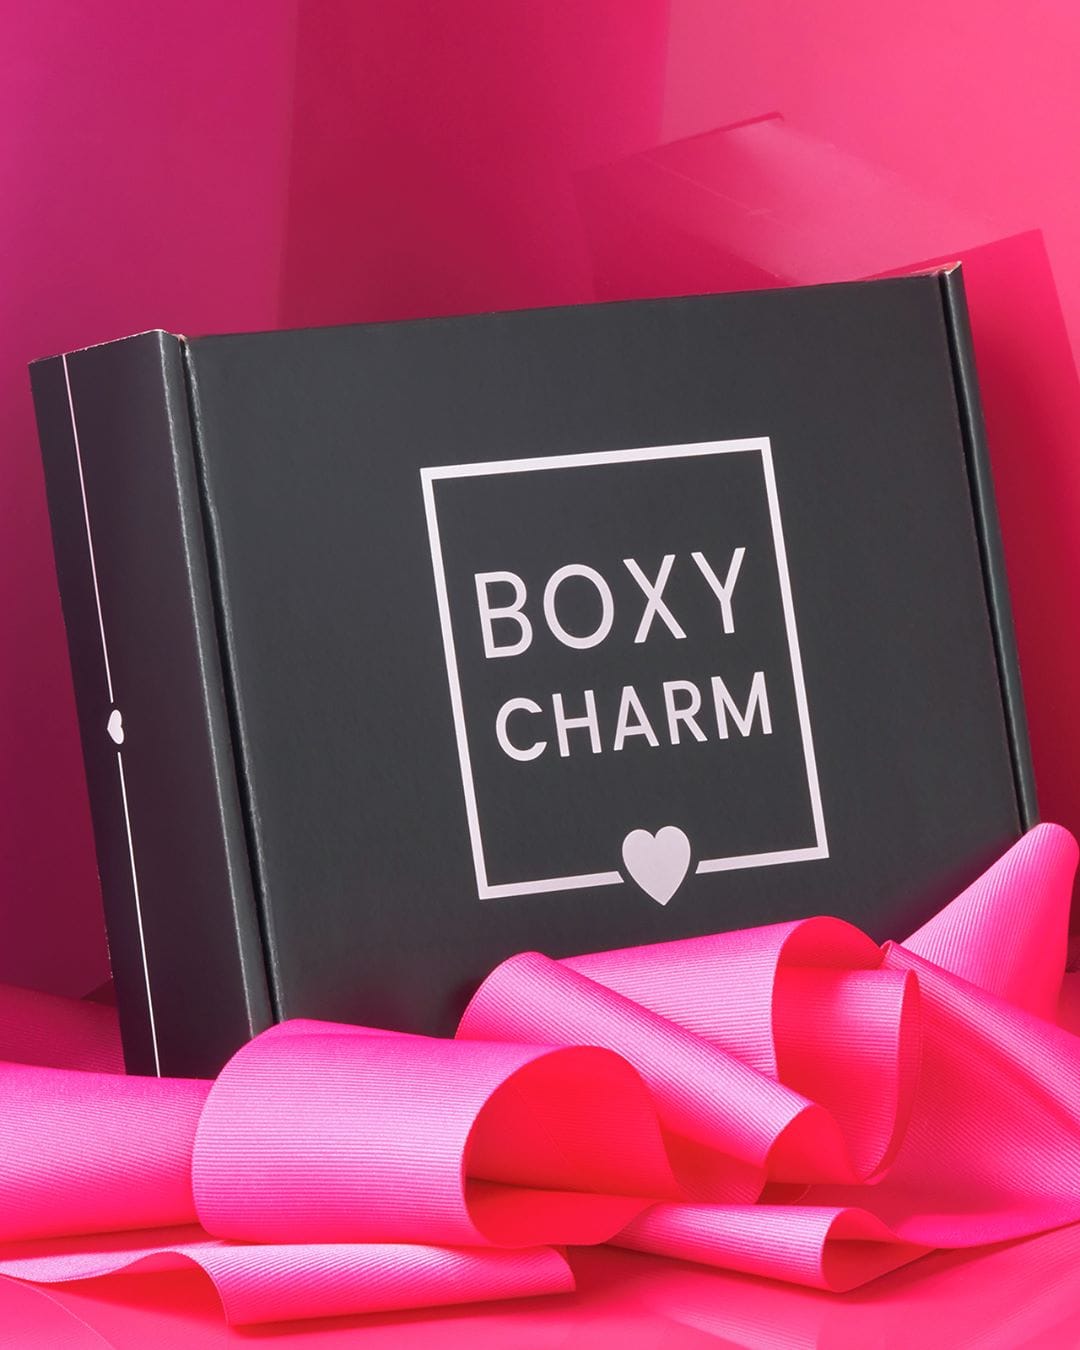 BOXYCHARM March 2020 Spoilers 4! Hello Subscription